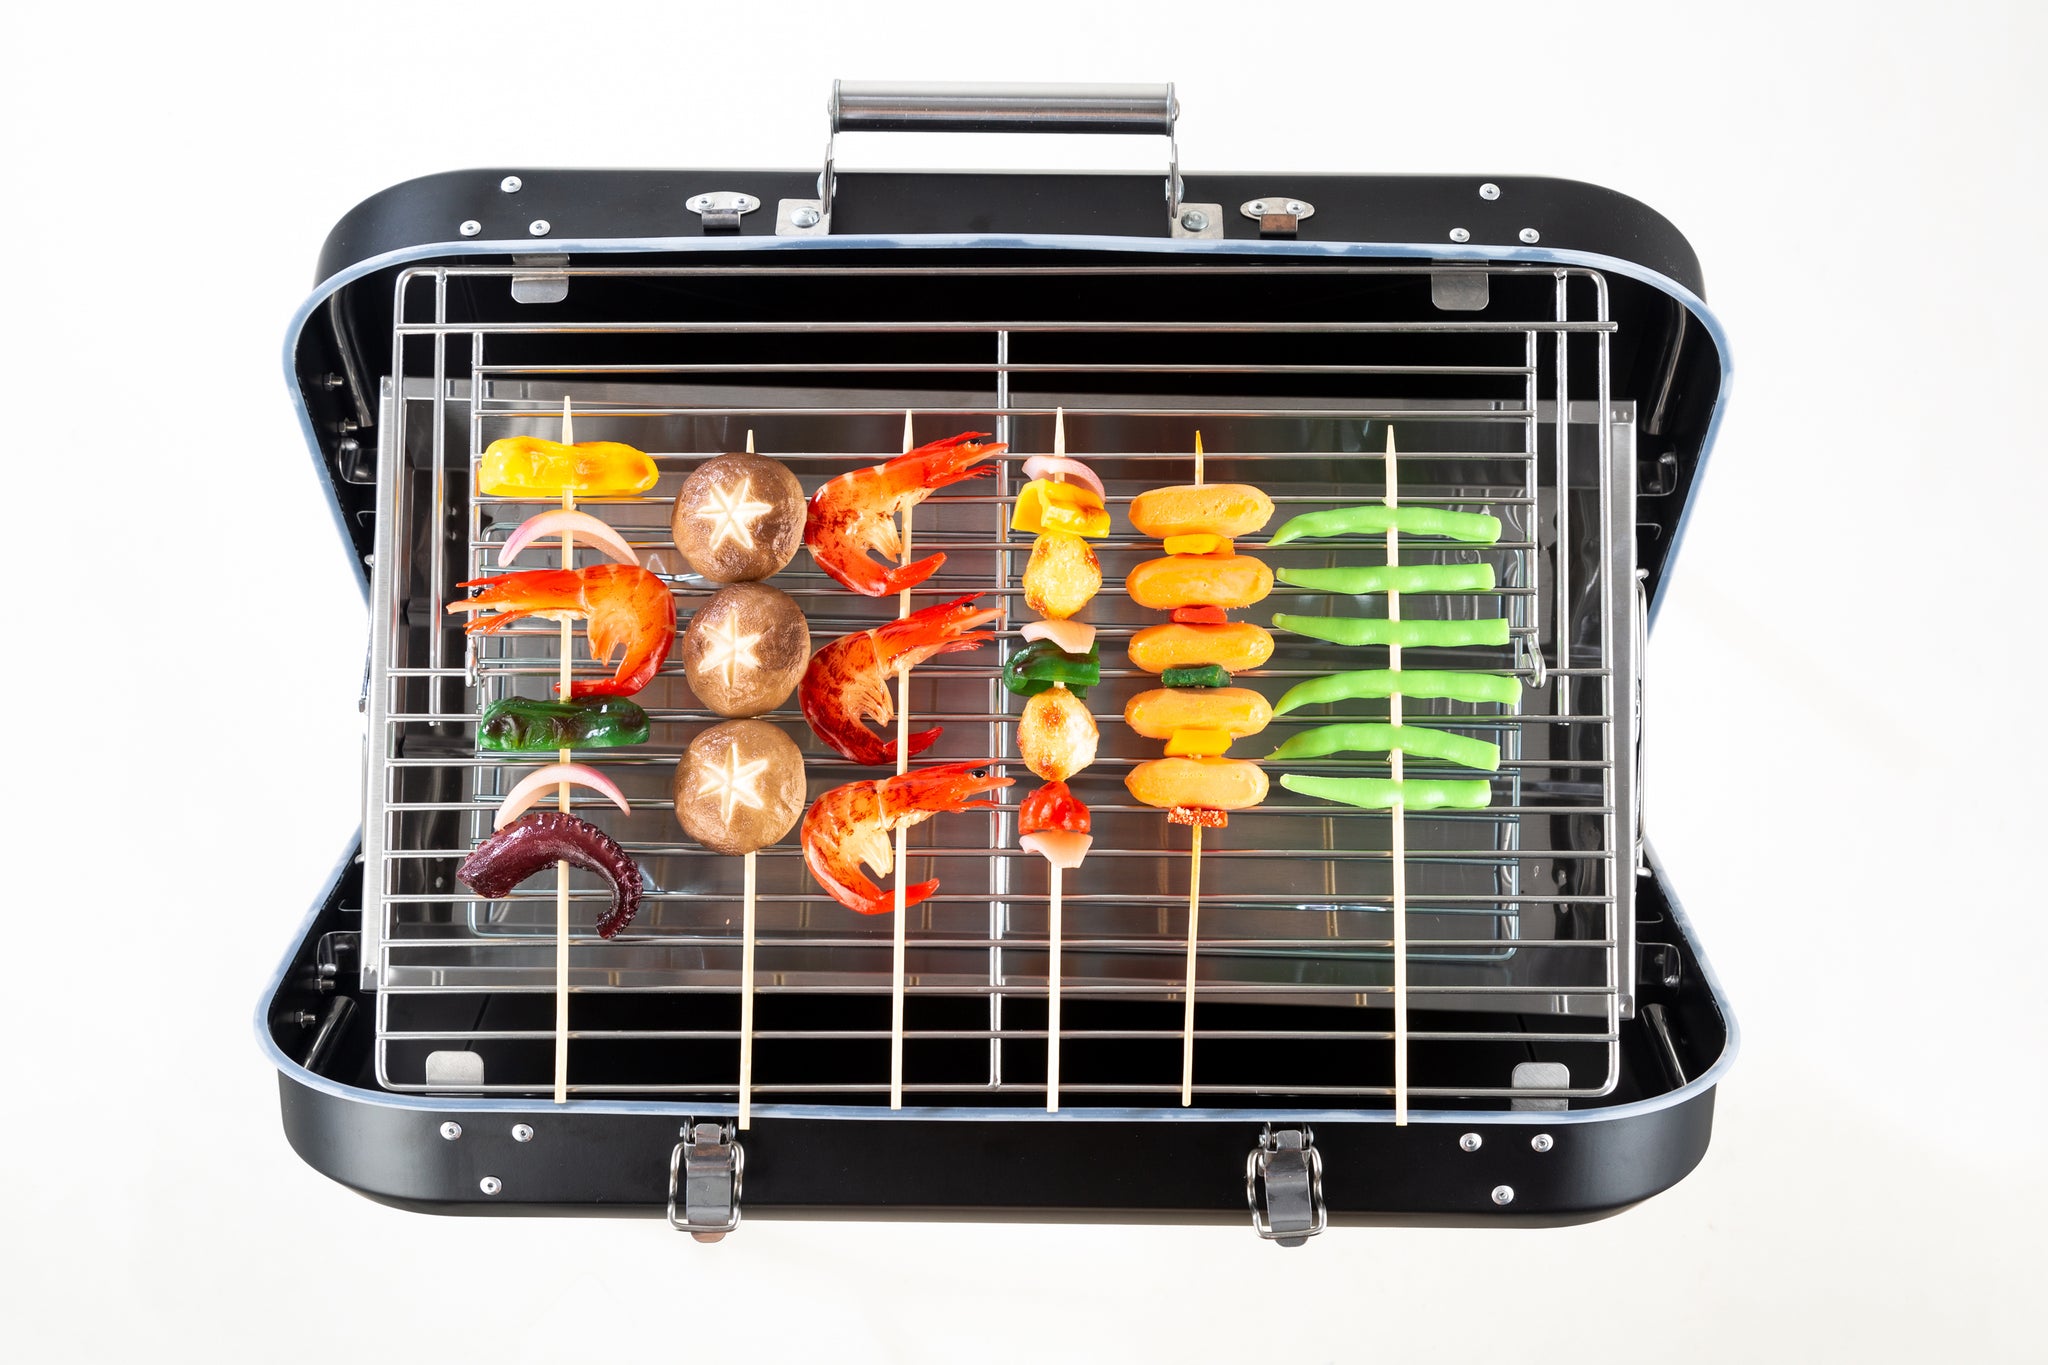 RaDEWAY Collapsible and portable Handle design BBQ grill for Outdoor BBQ